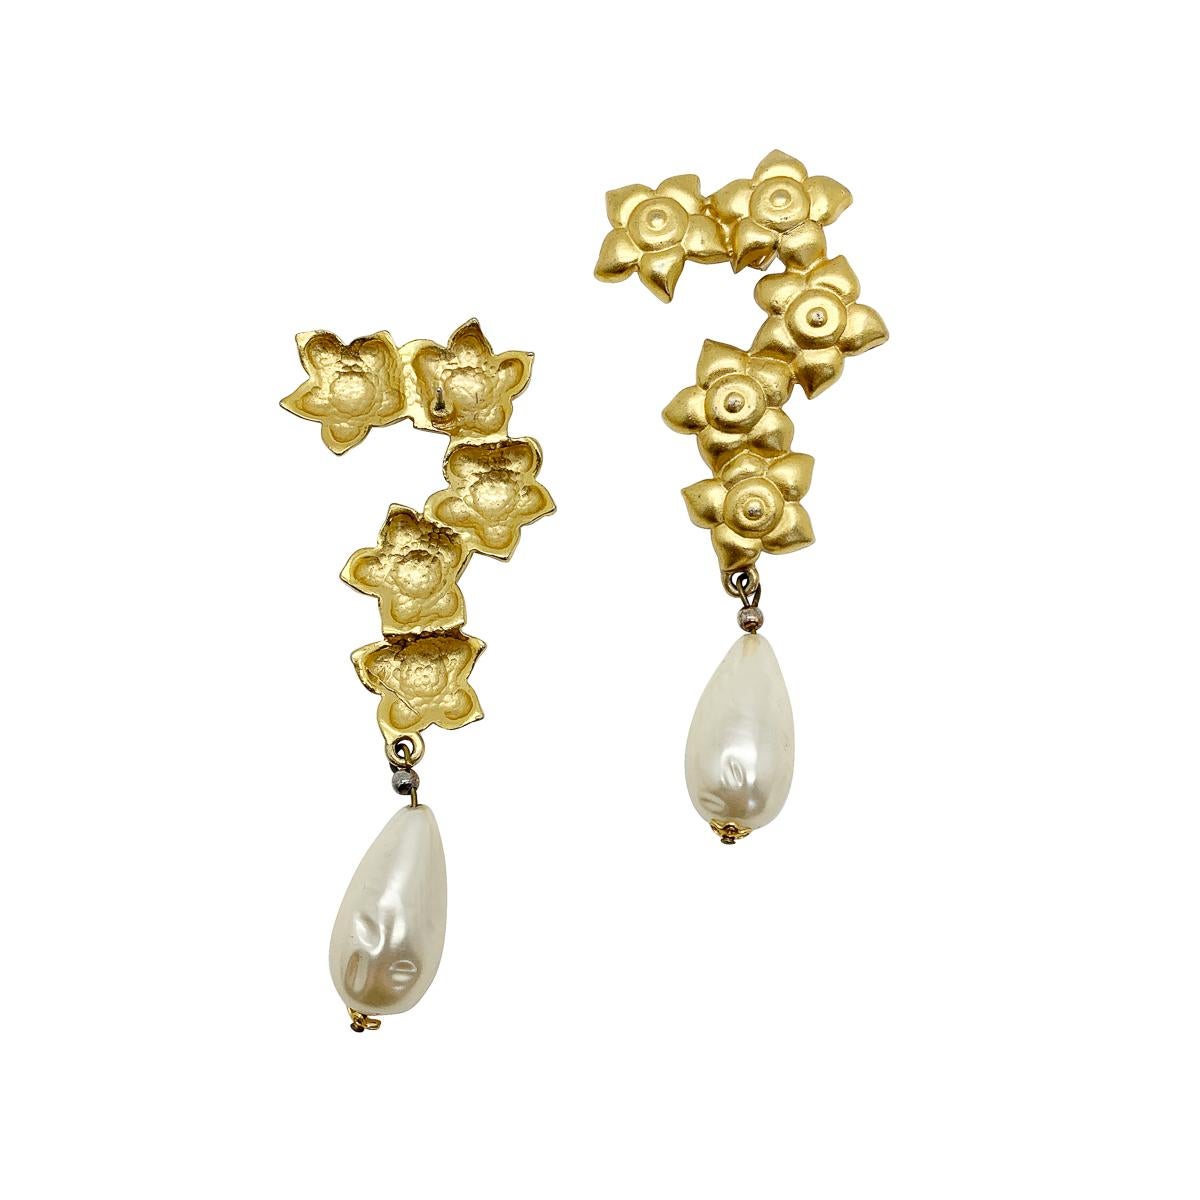 A pair of vintage floral pearl earrings.

Vintage Condition: Very good without damage or noteworthy wear.
Materials: gilded metal, simulated pearl
Fastening: Post for pierced ears
Approximate Dimensions: 8.8cm
A wonderfully stylish pair of statement